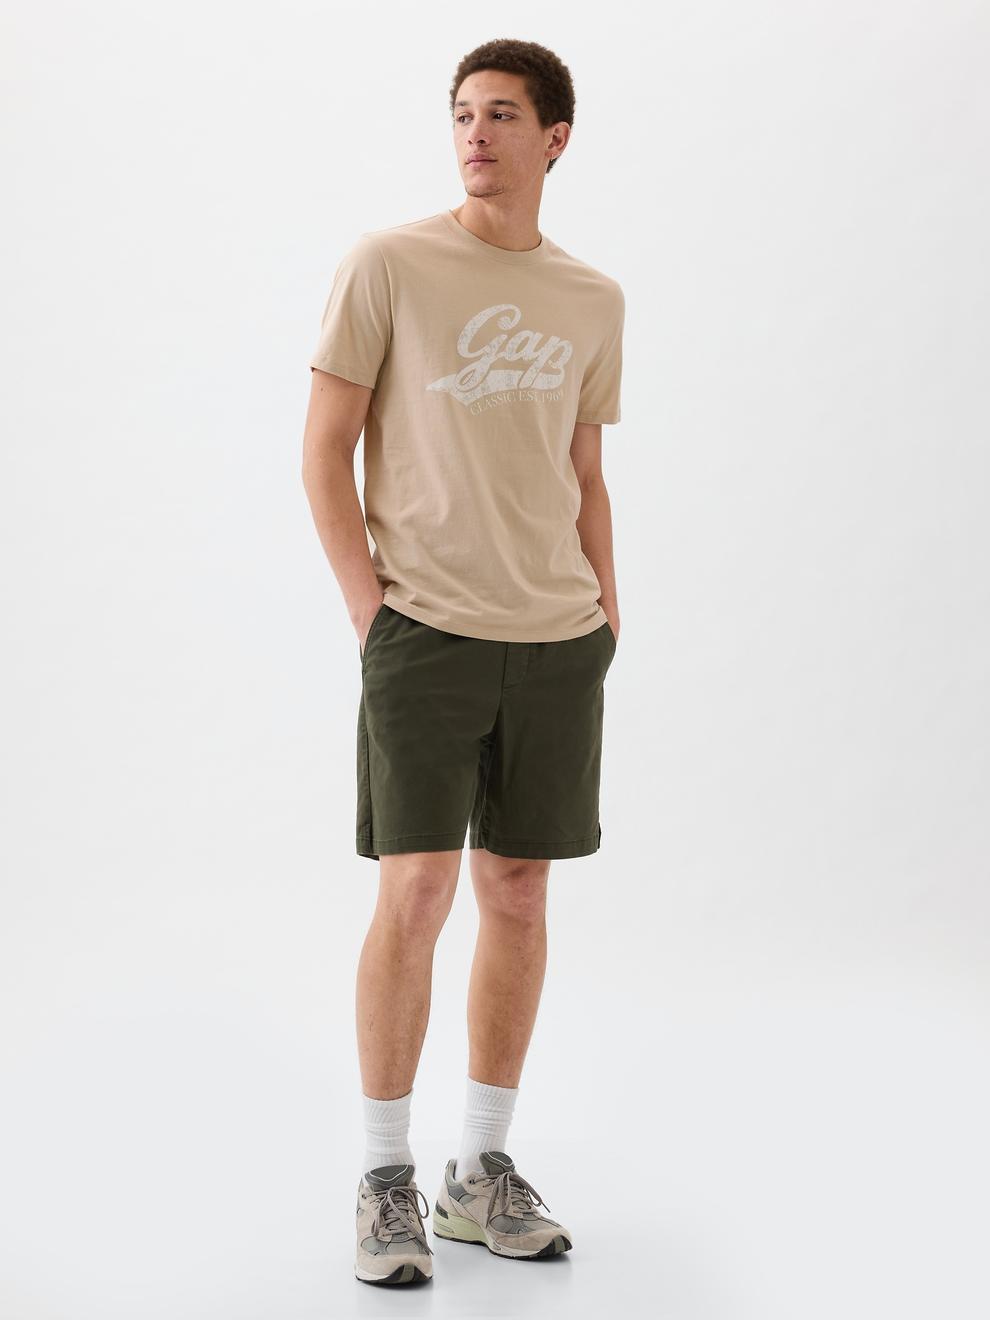 Everyday Soft Gap Graphic T-Shirt offers at 59 Dhs in Gap